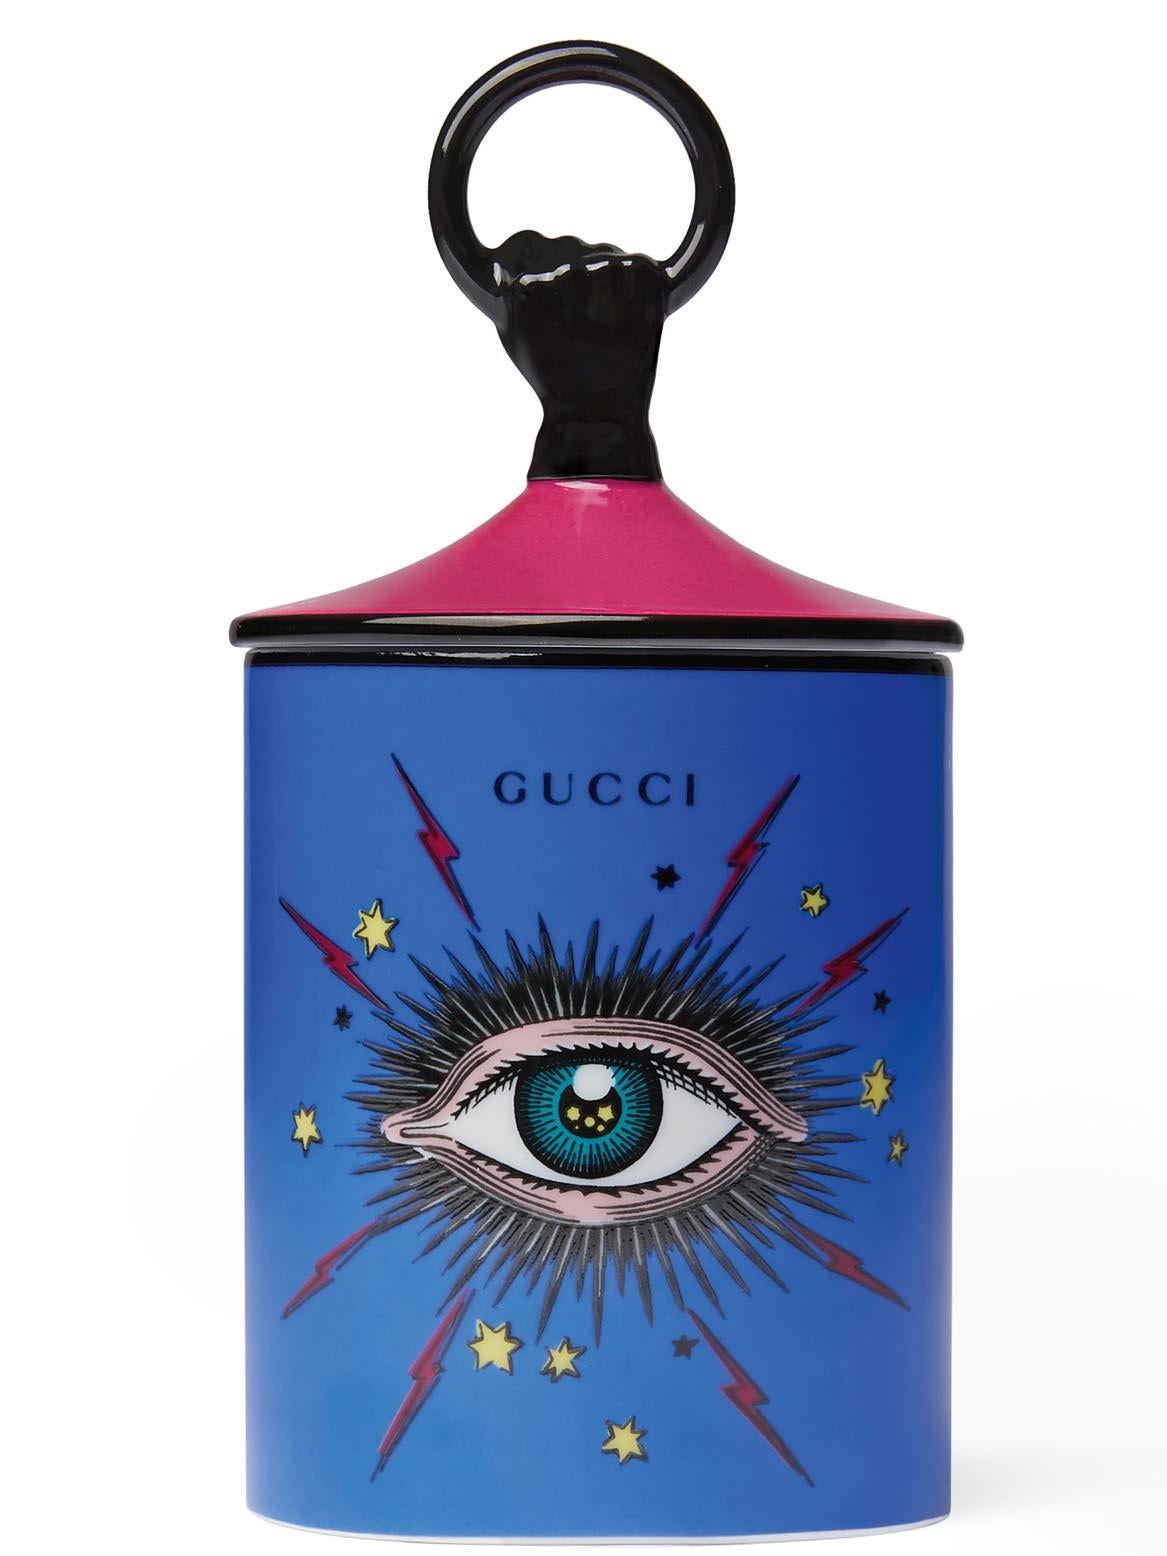 Items feature a multitude of design motifs we have come to associate with his collections (Image: Gucci)